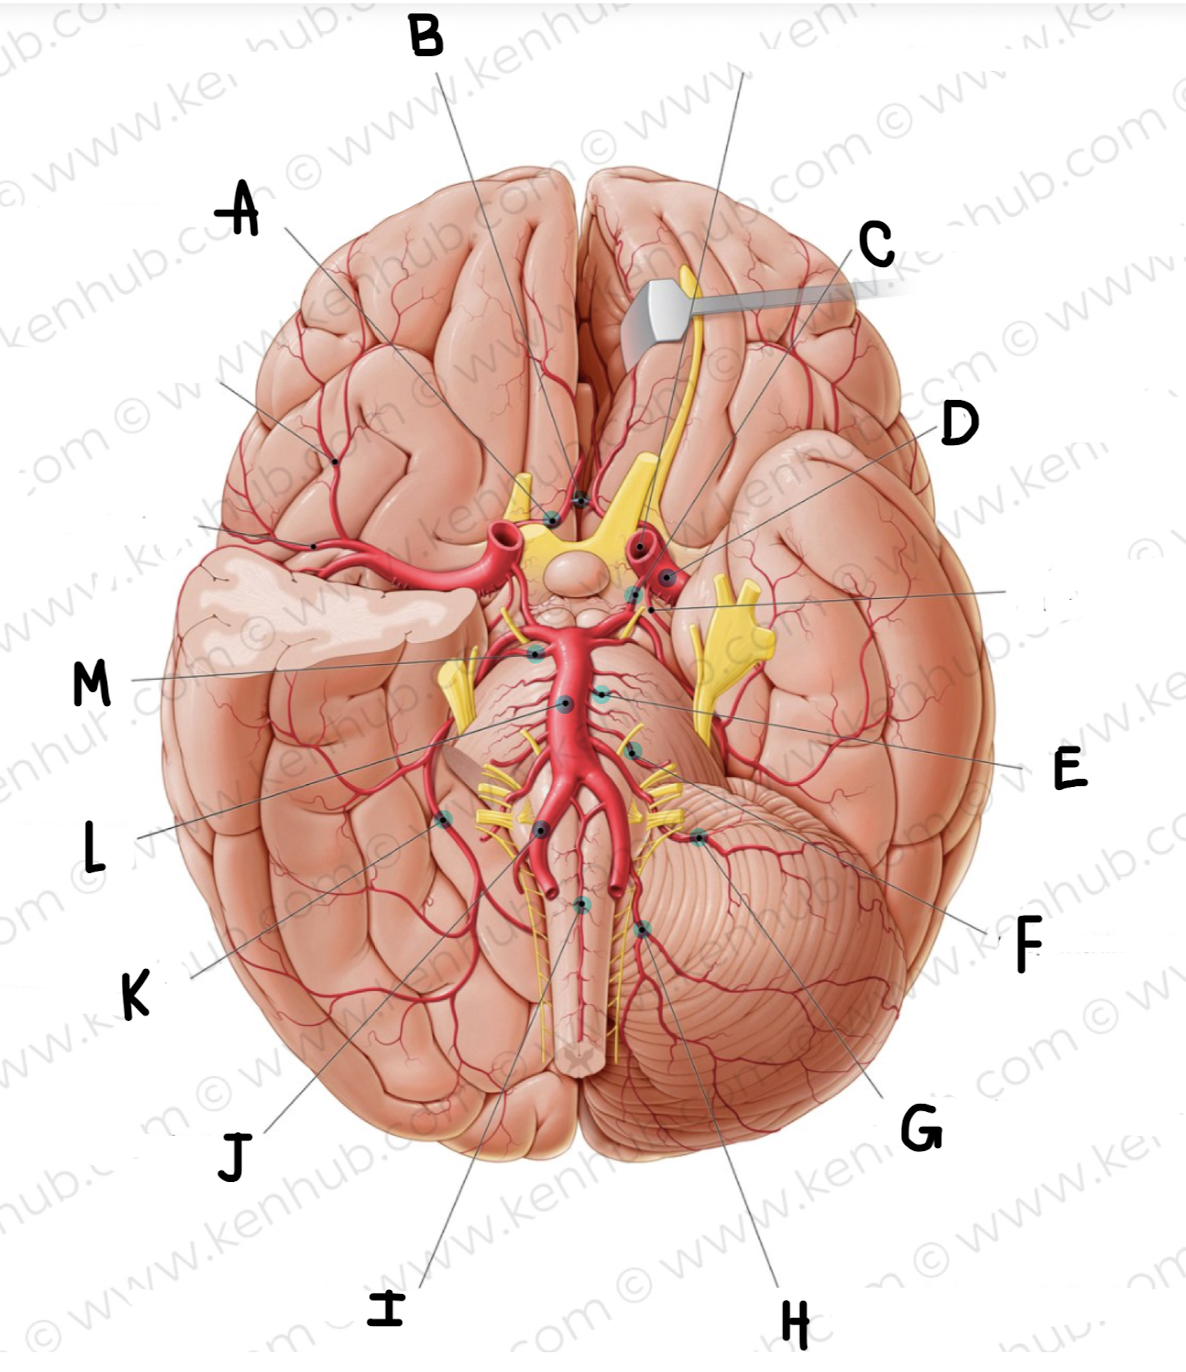 <p>What is the name of the artery labeled L?</p>